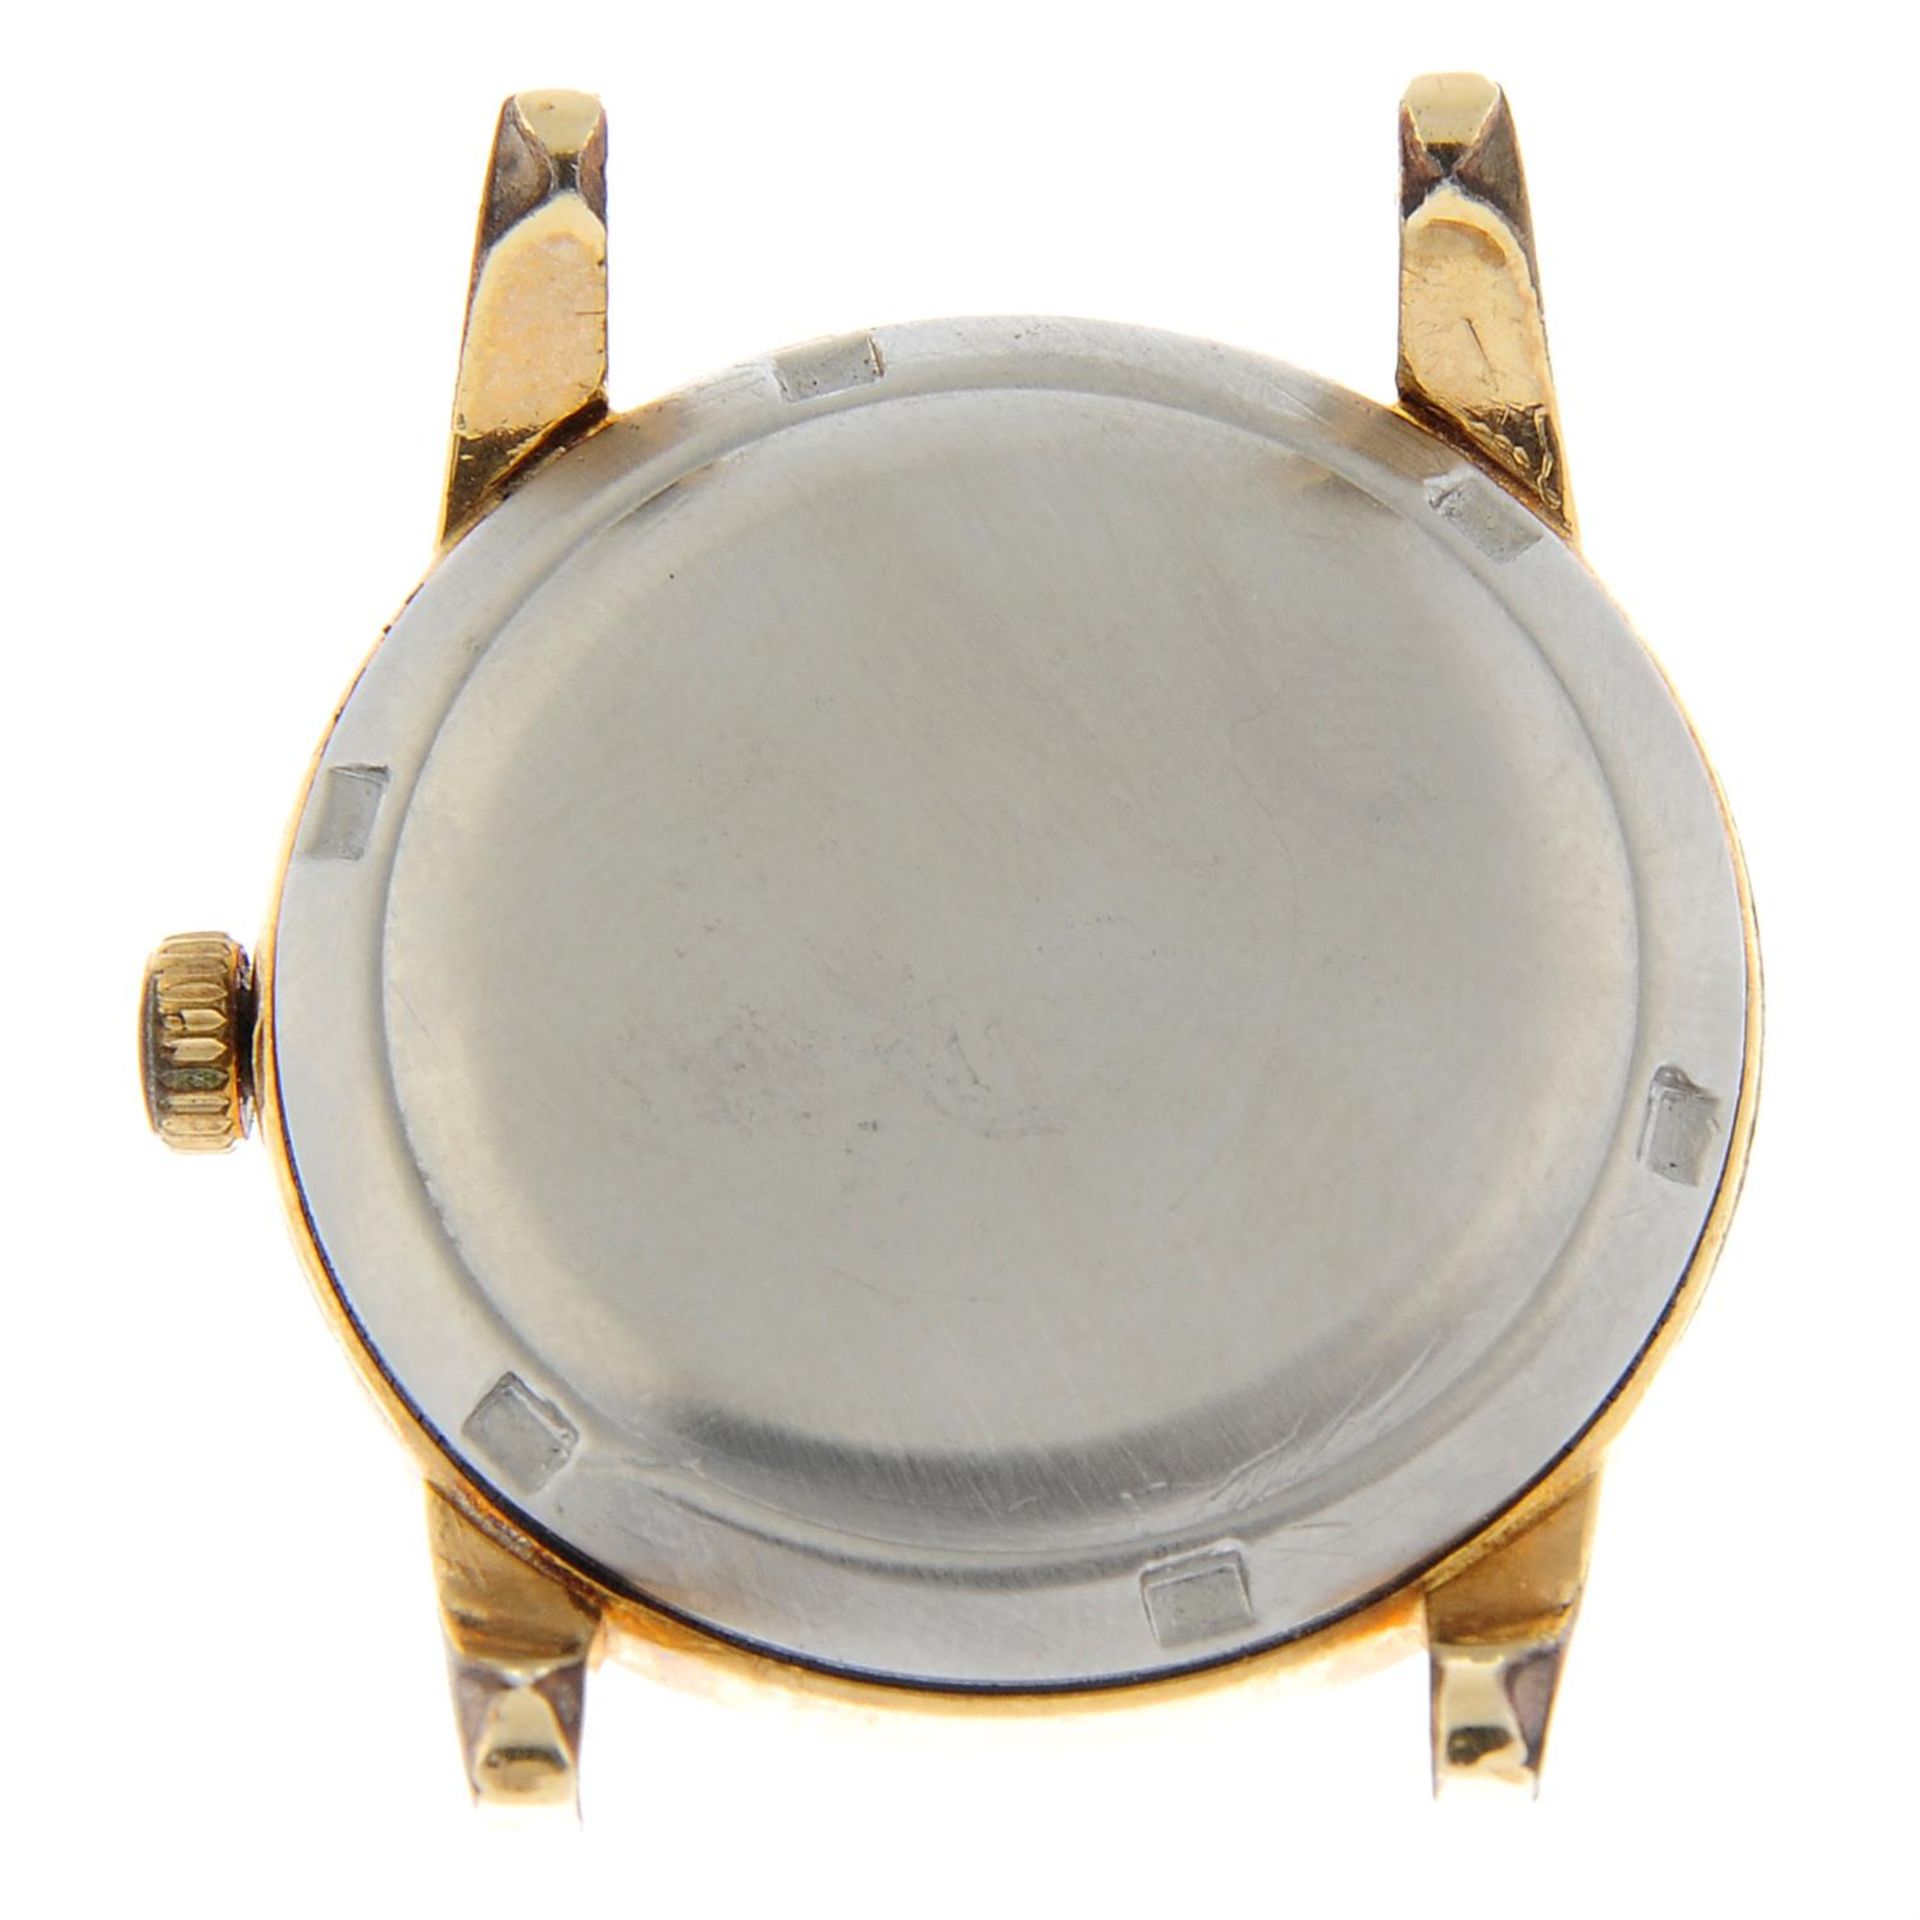 OMEGA - a gold plated Seamaster watch head, 34mm. - Image 2 of 2